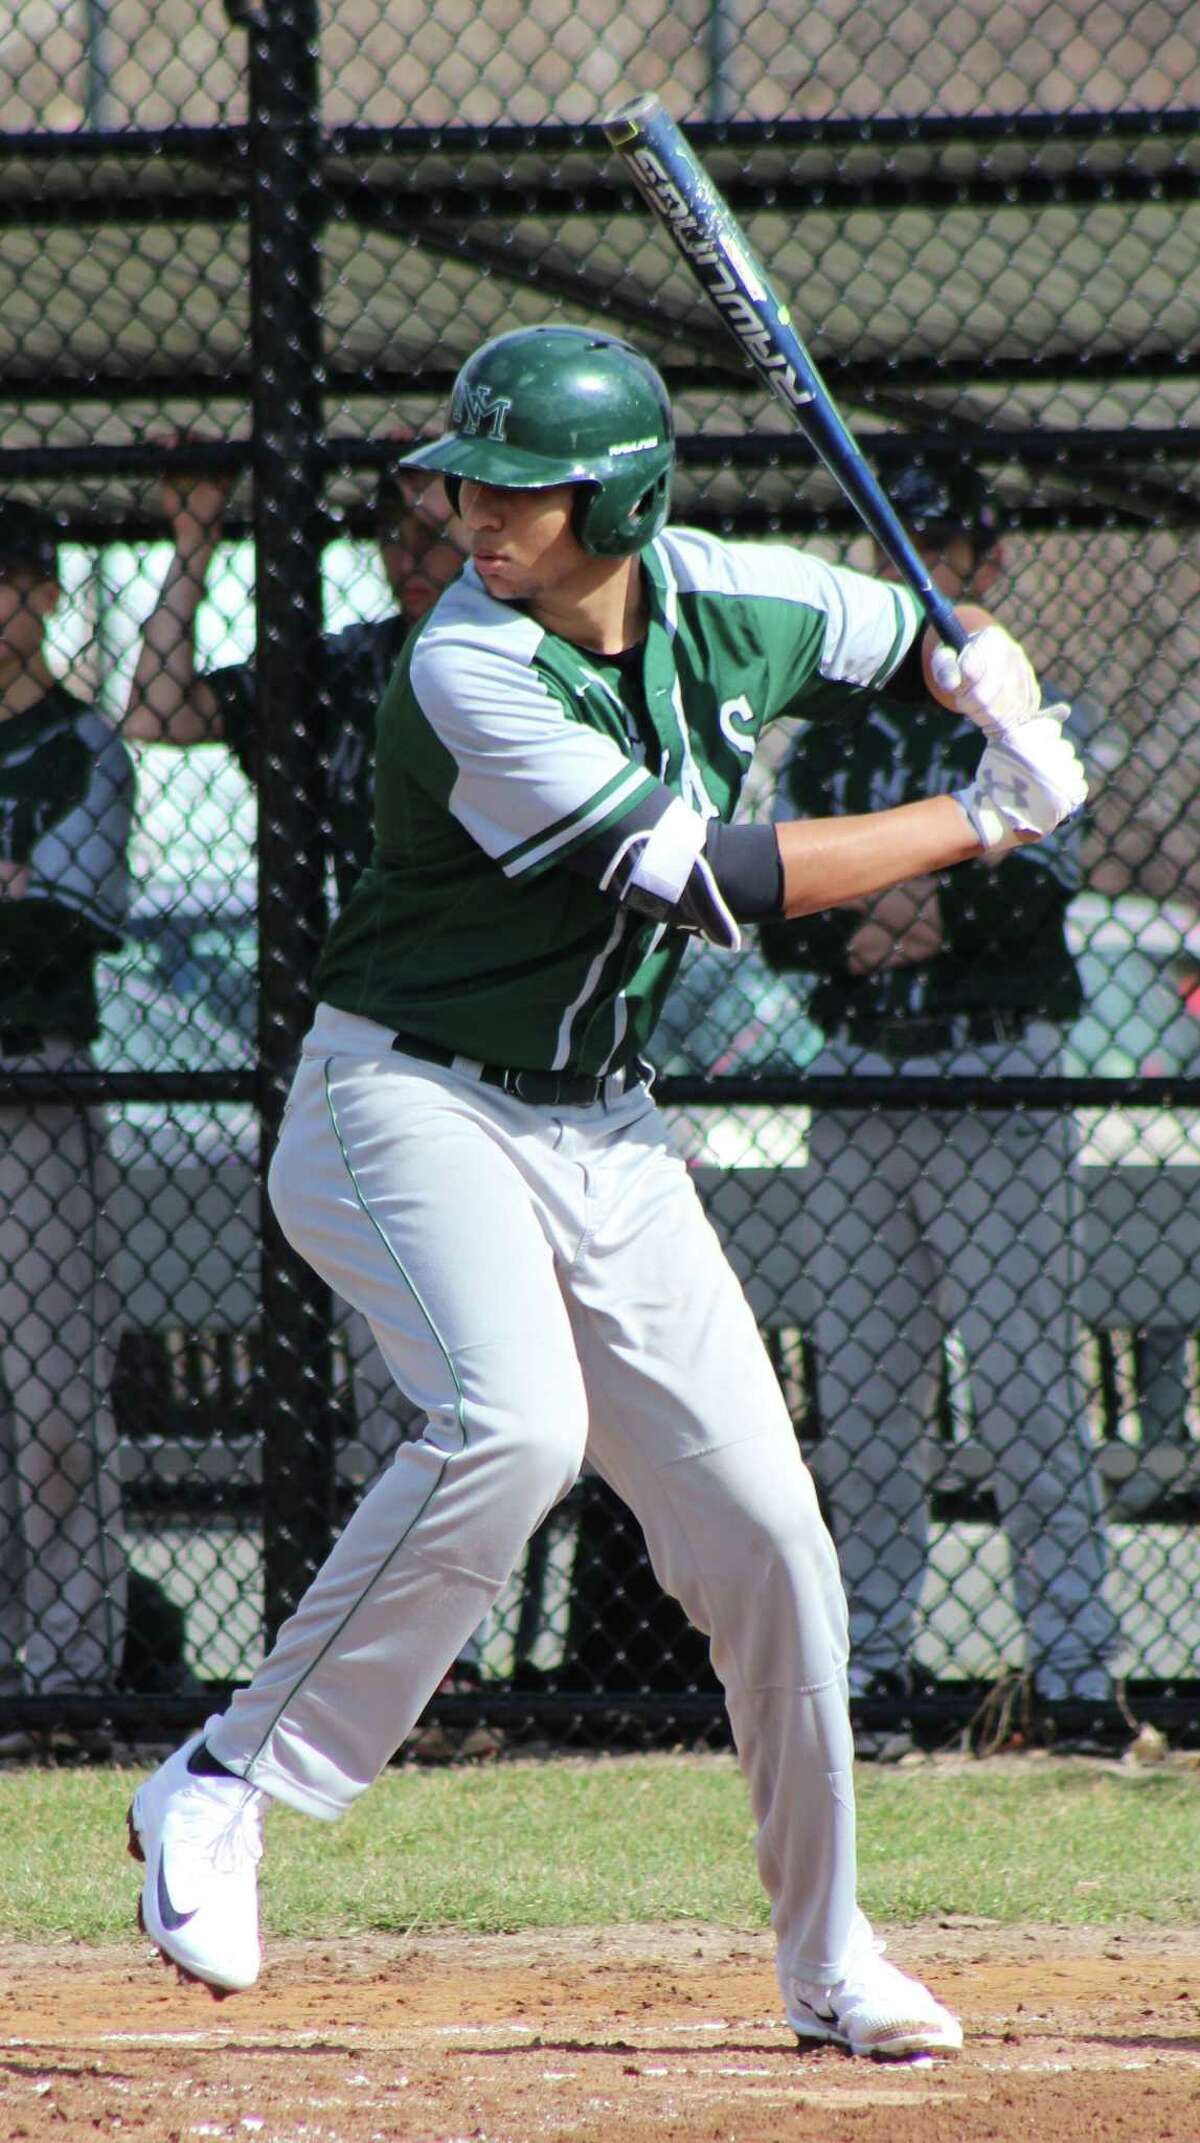 New Milford slugger Noah Martinez gets ready to take a swing during the baseball game at Abbott Tech in Danbury April 5, 2017.